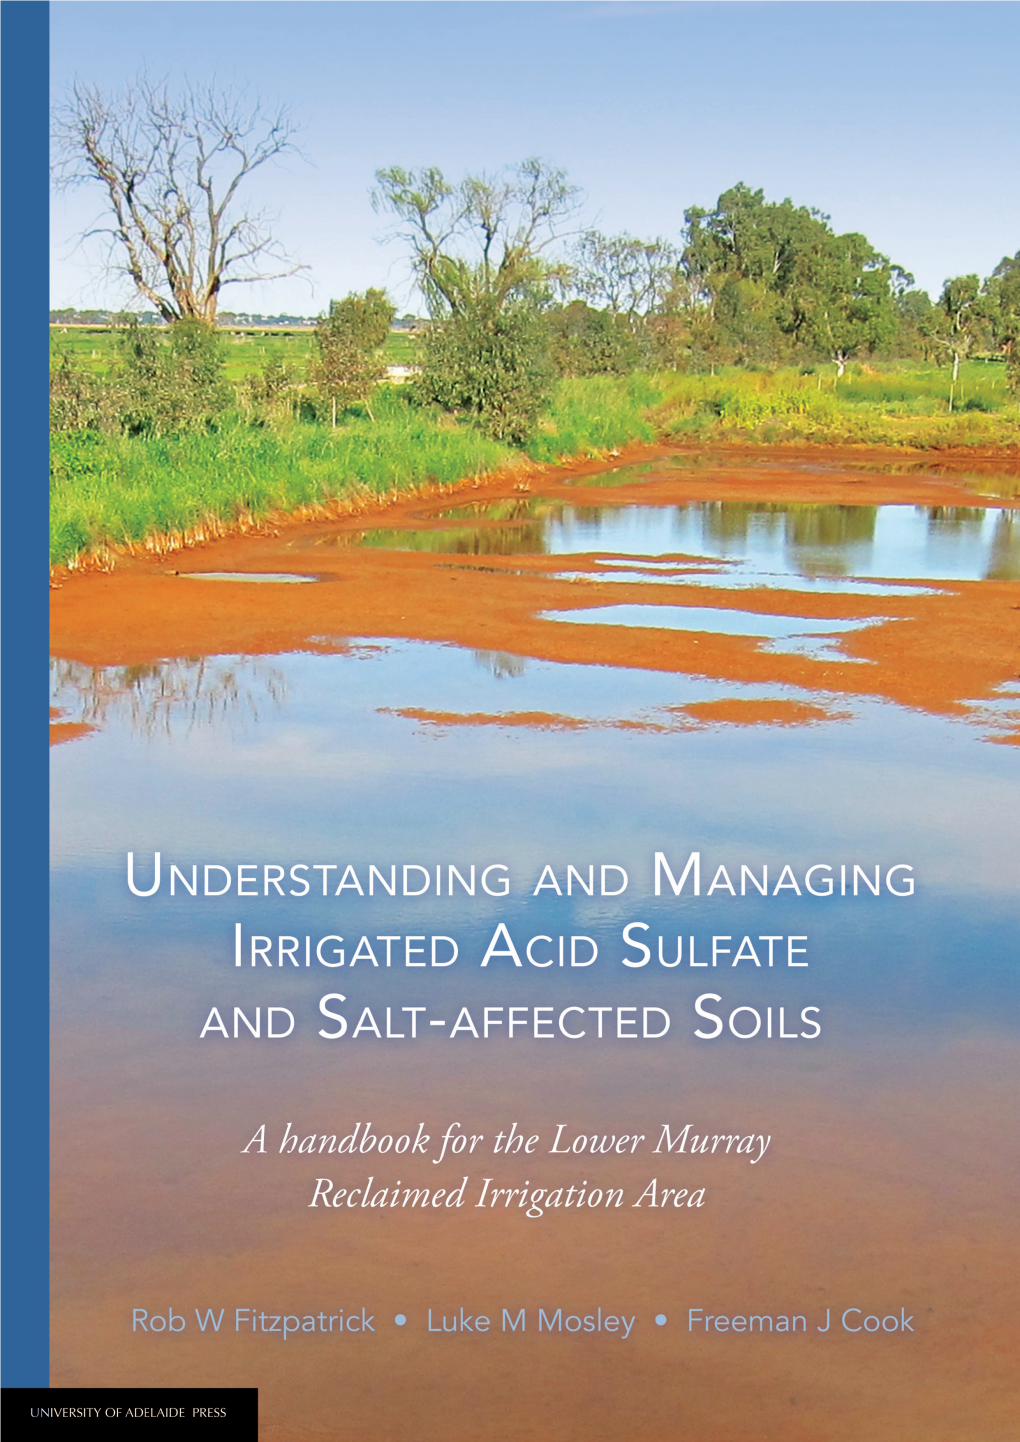 Understanding and Managing Irrigated Acid Sulfate and Salt-Affected Soils